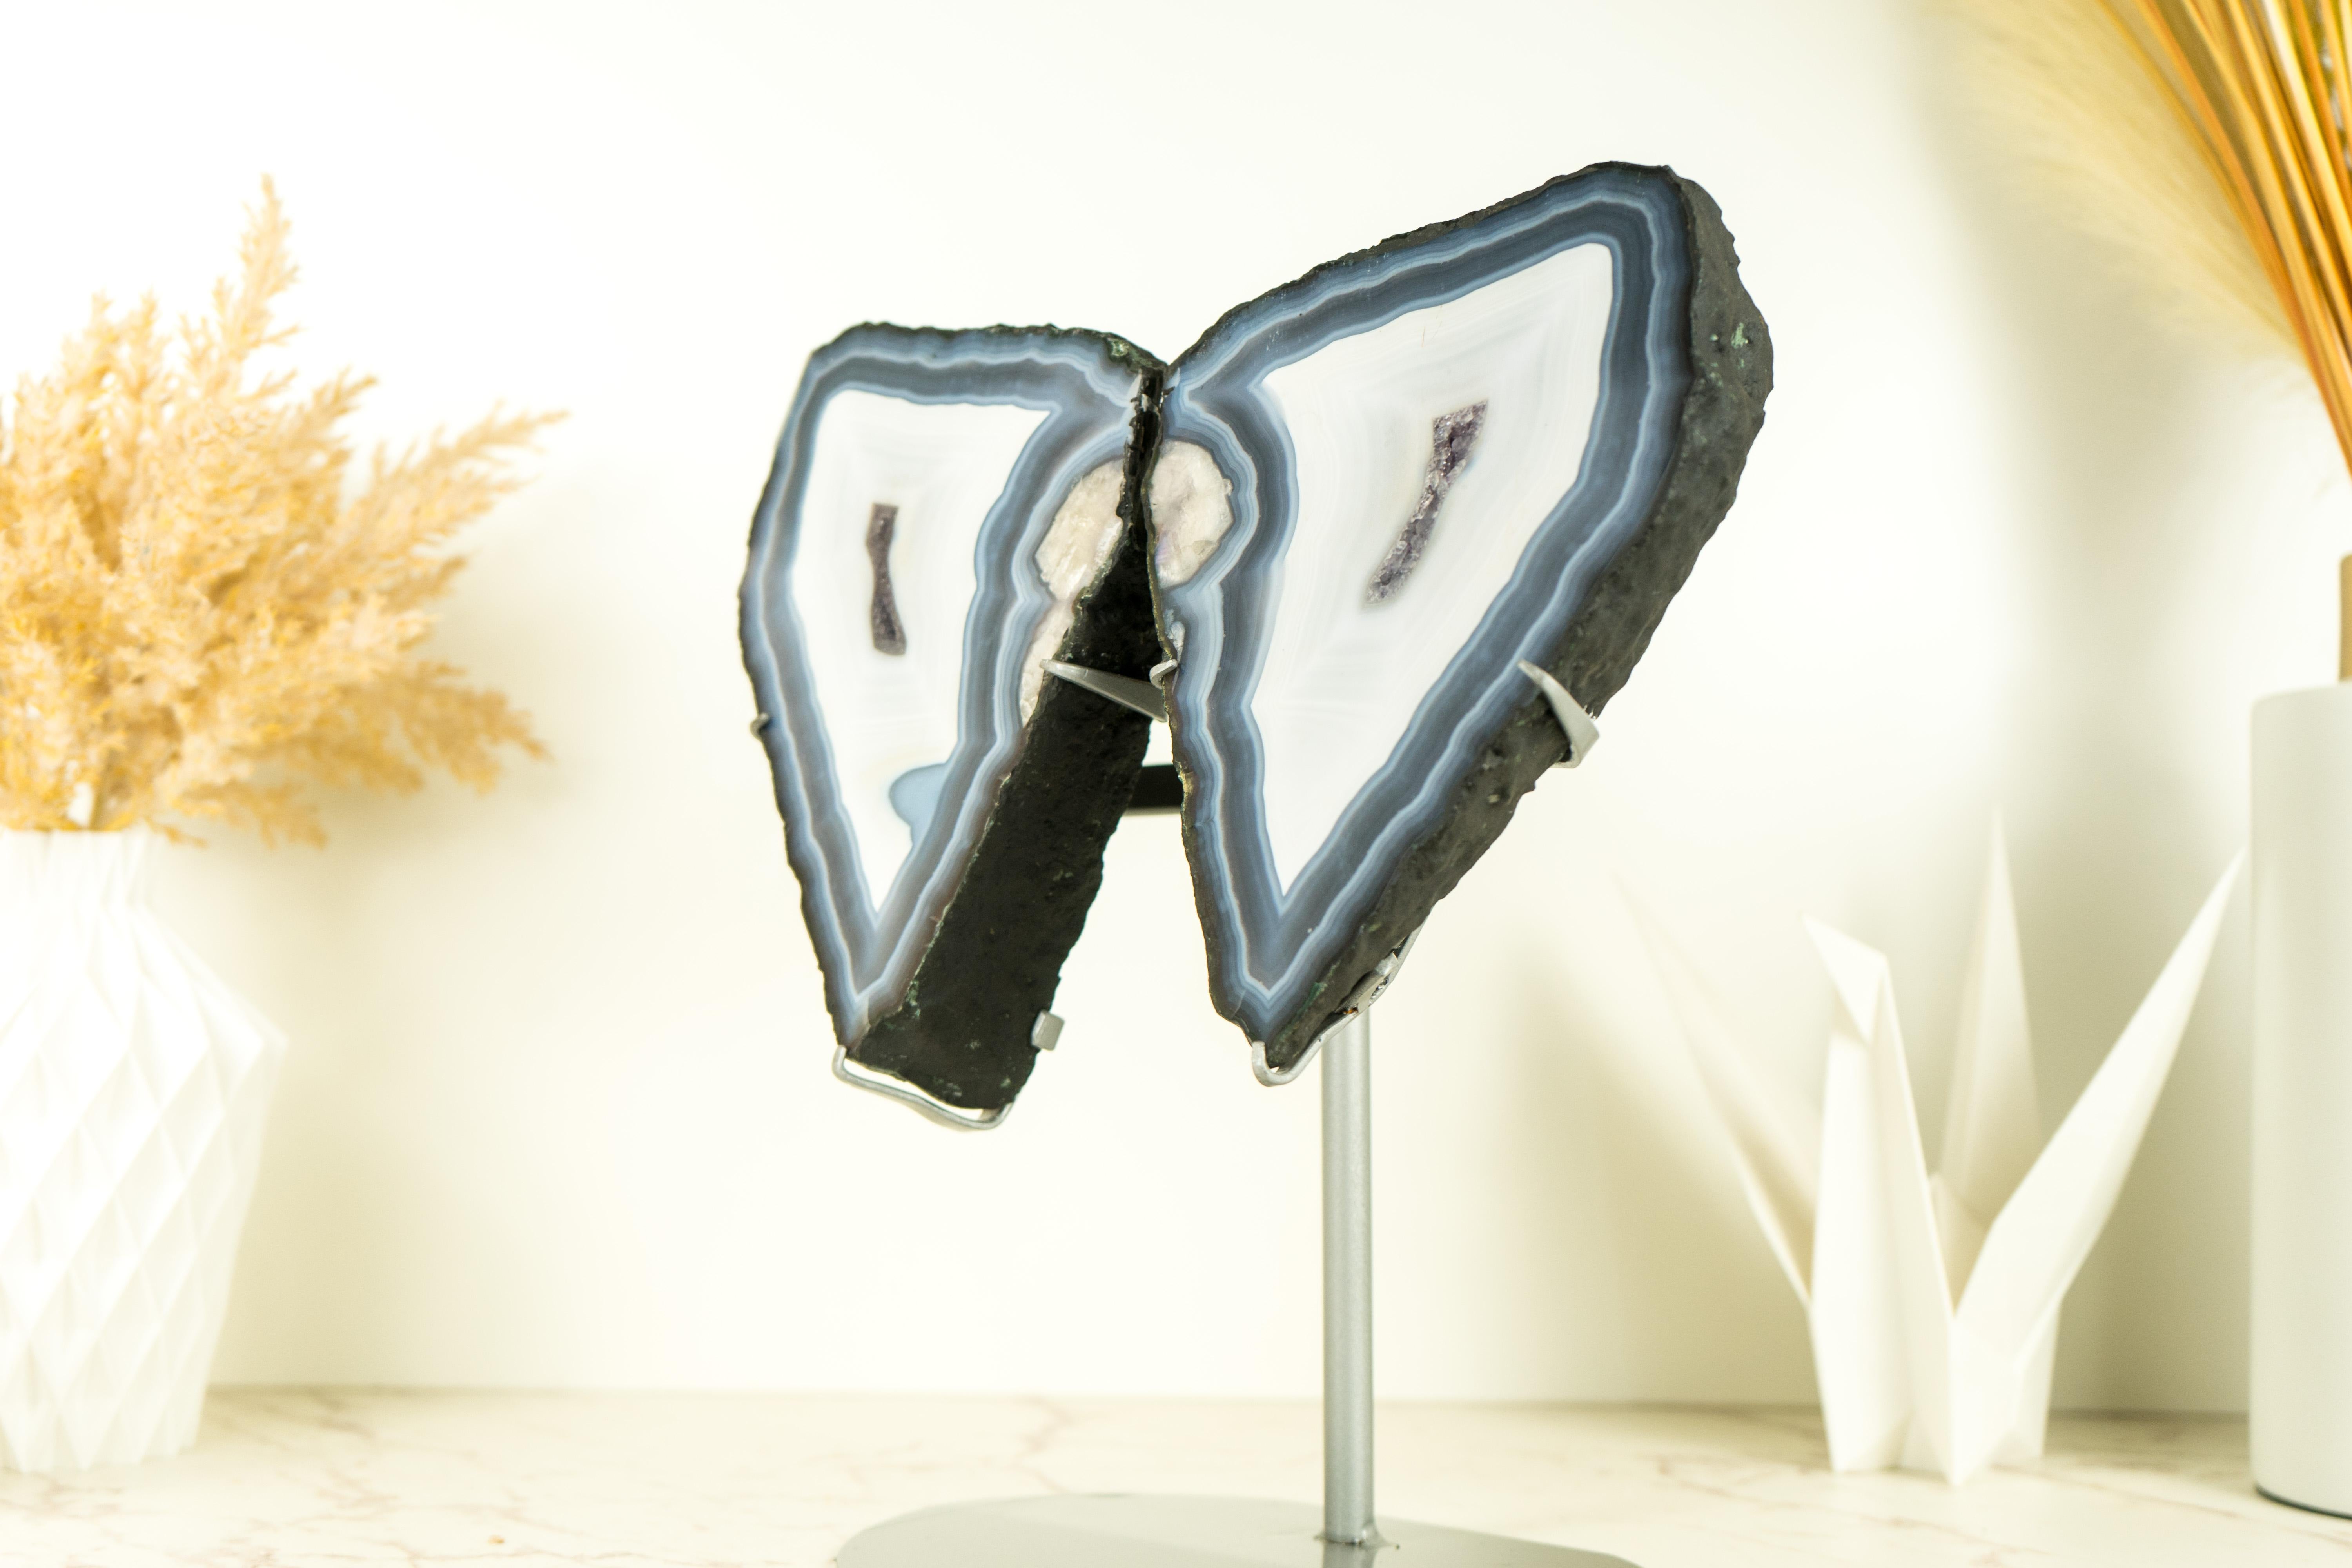 We were absolutely astounded when we first saw this exquisite agate specimen after cutting it. It transformed itself, from a geode into a world-class Agate Butterfly Wings Geode, resembling the delicate wings of an angel or butterfly. 

The Agate